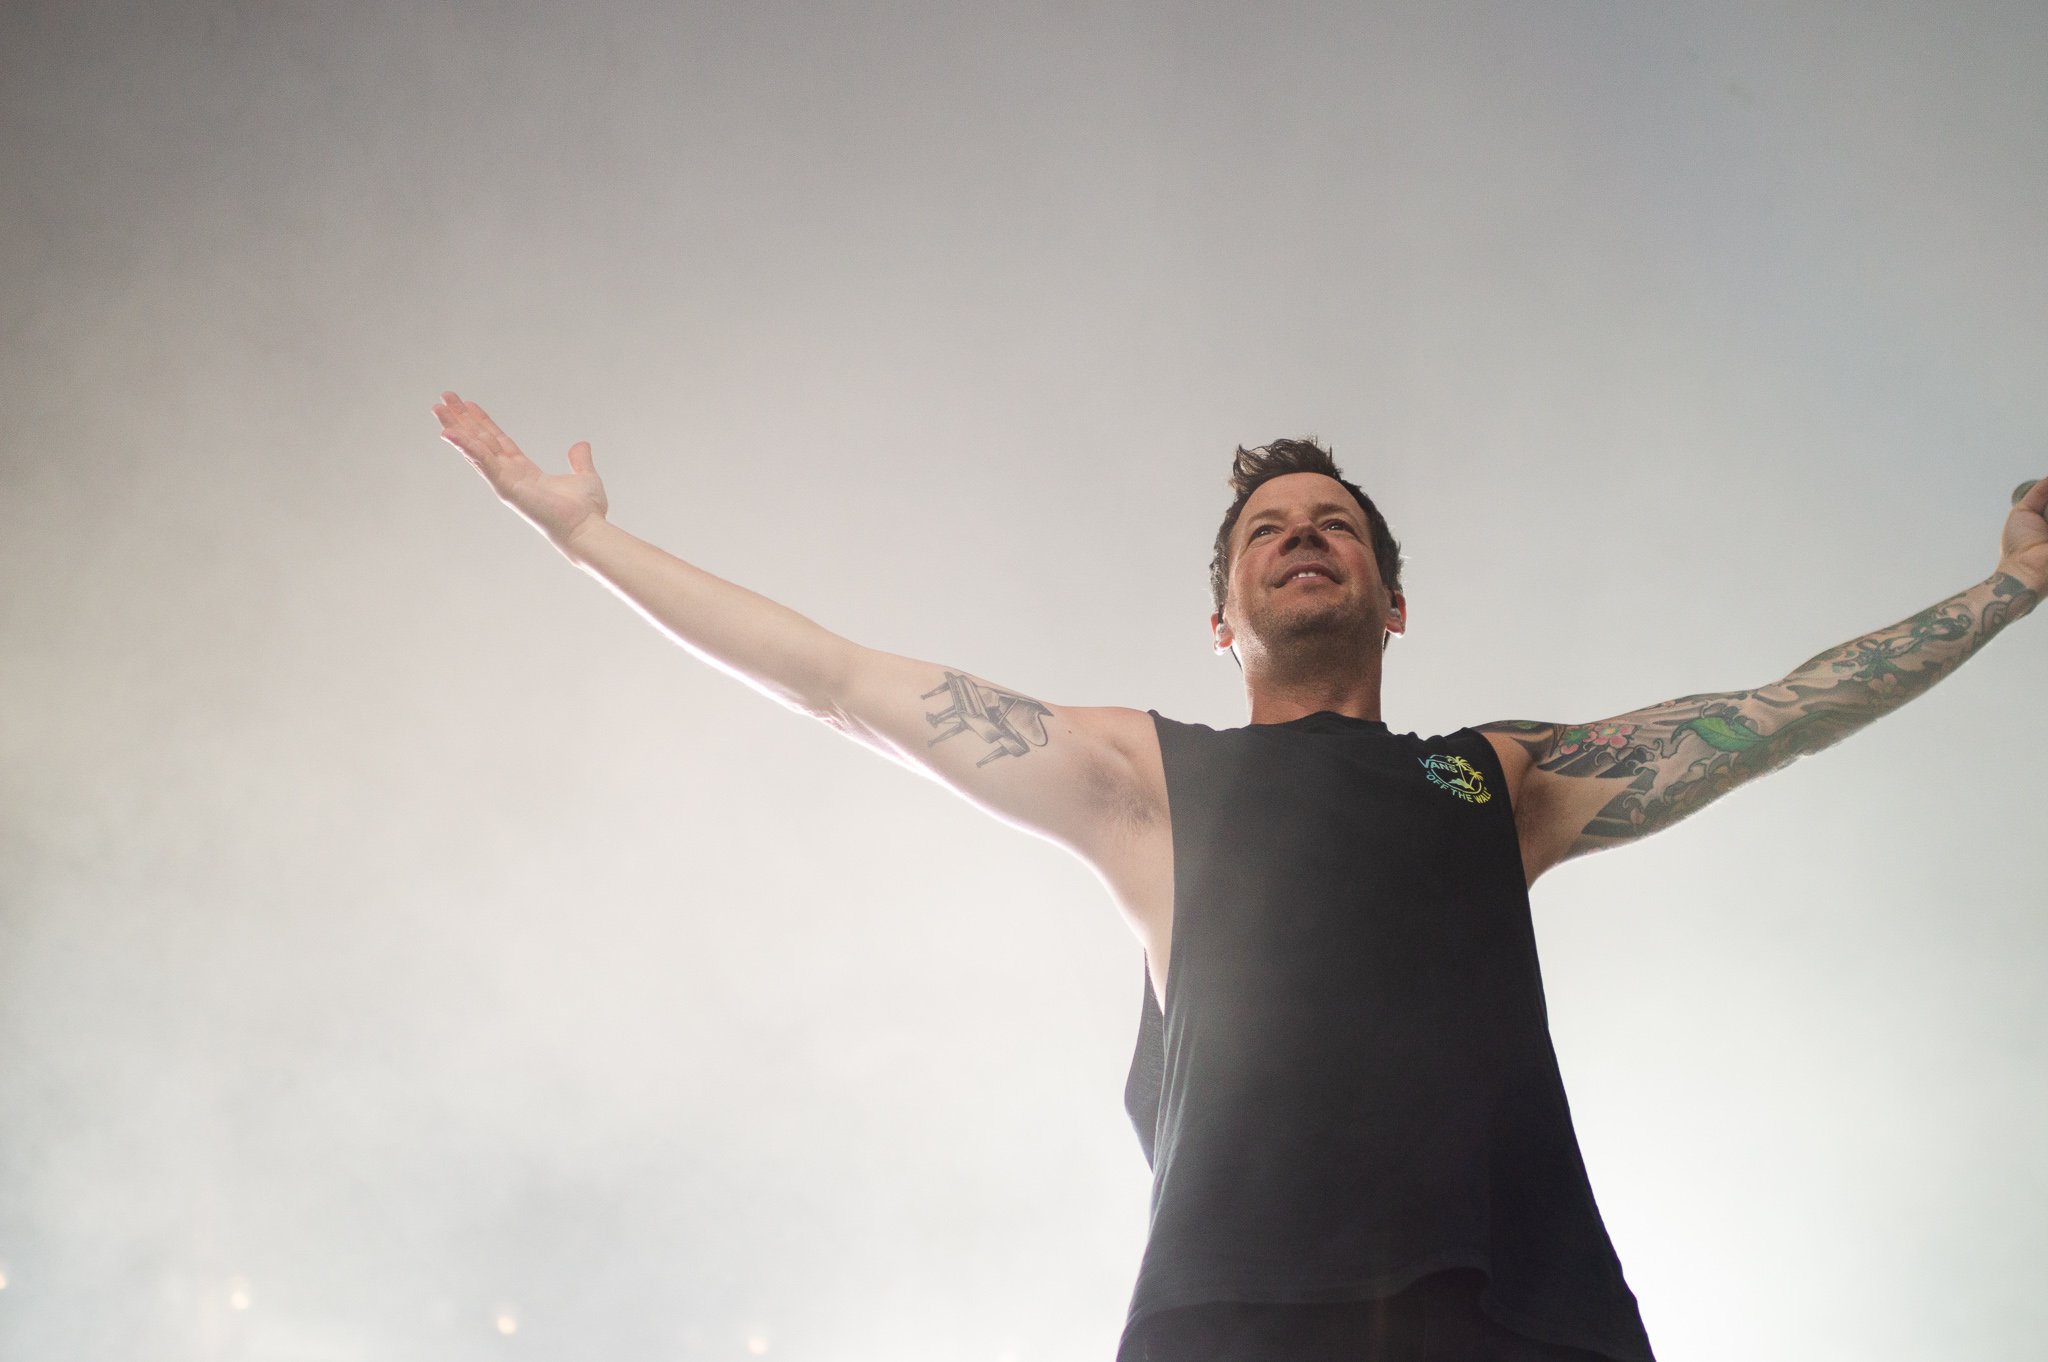  Pierre Bouvier gives a high energy performance as the lead singer of Simple Plan. 